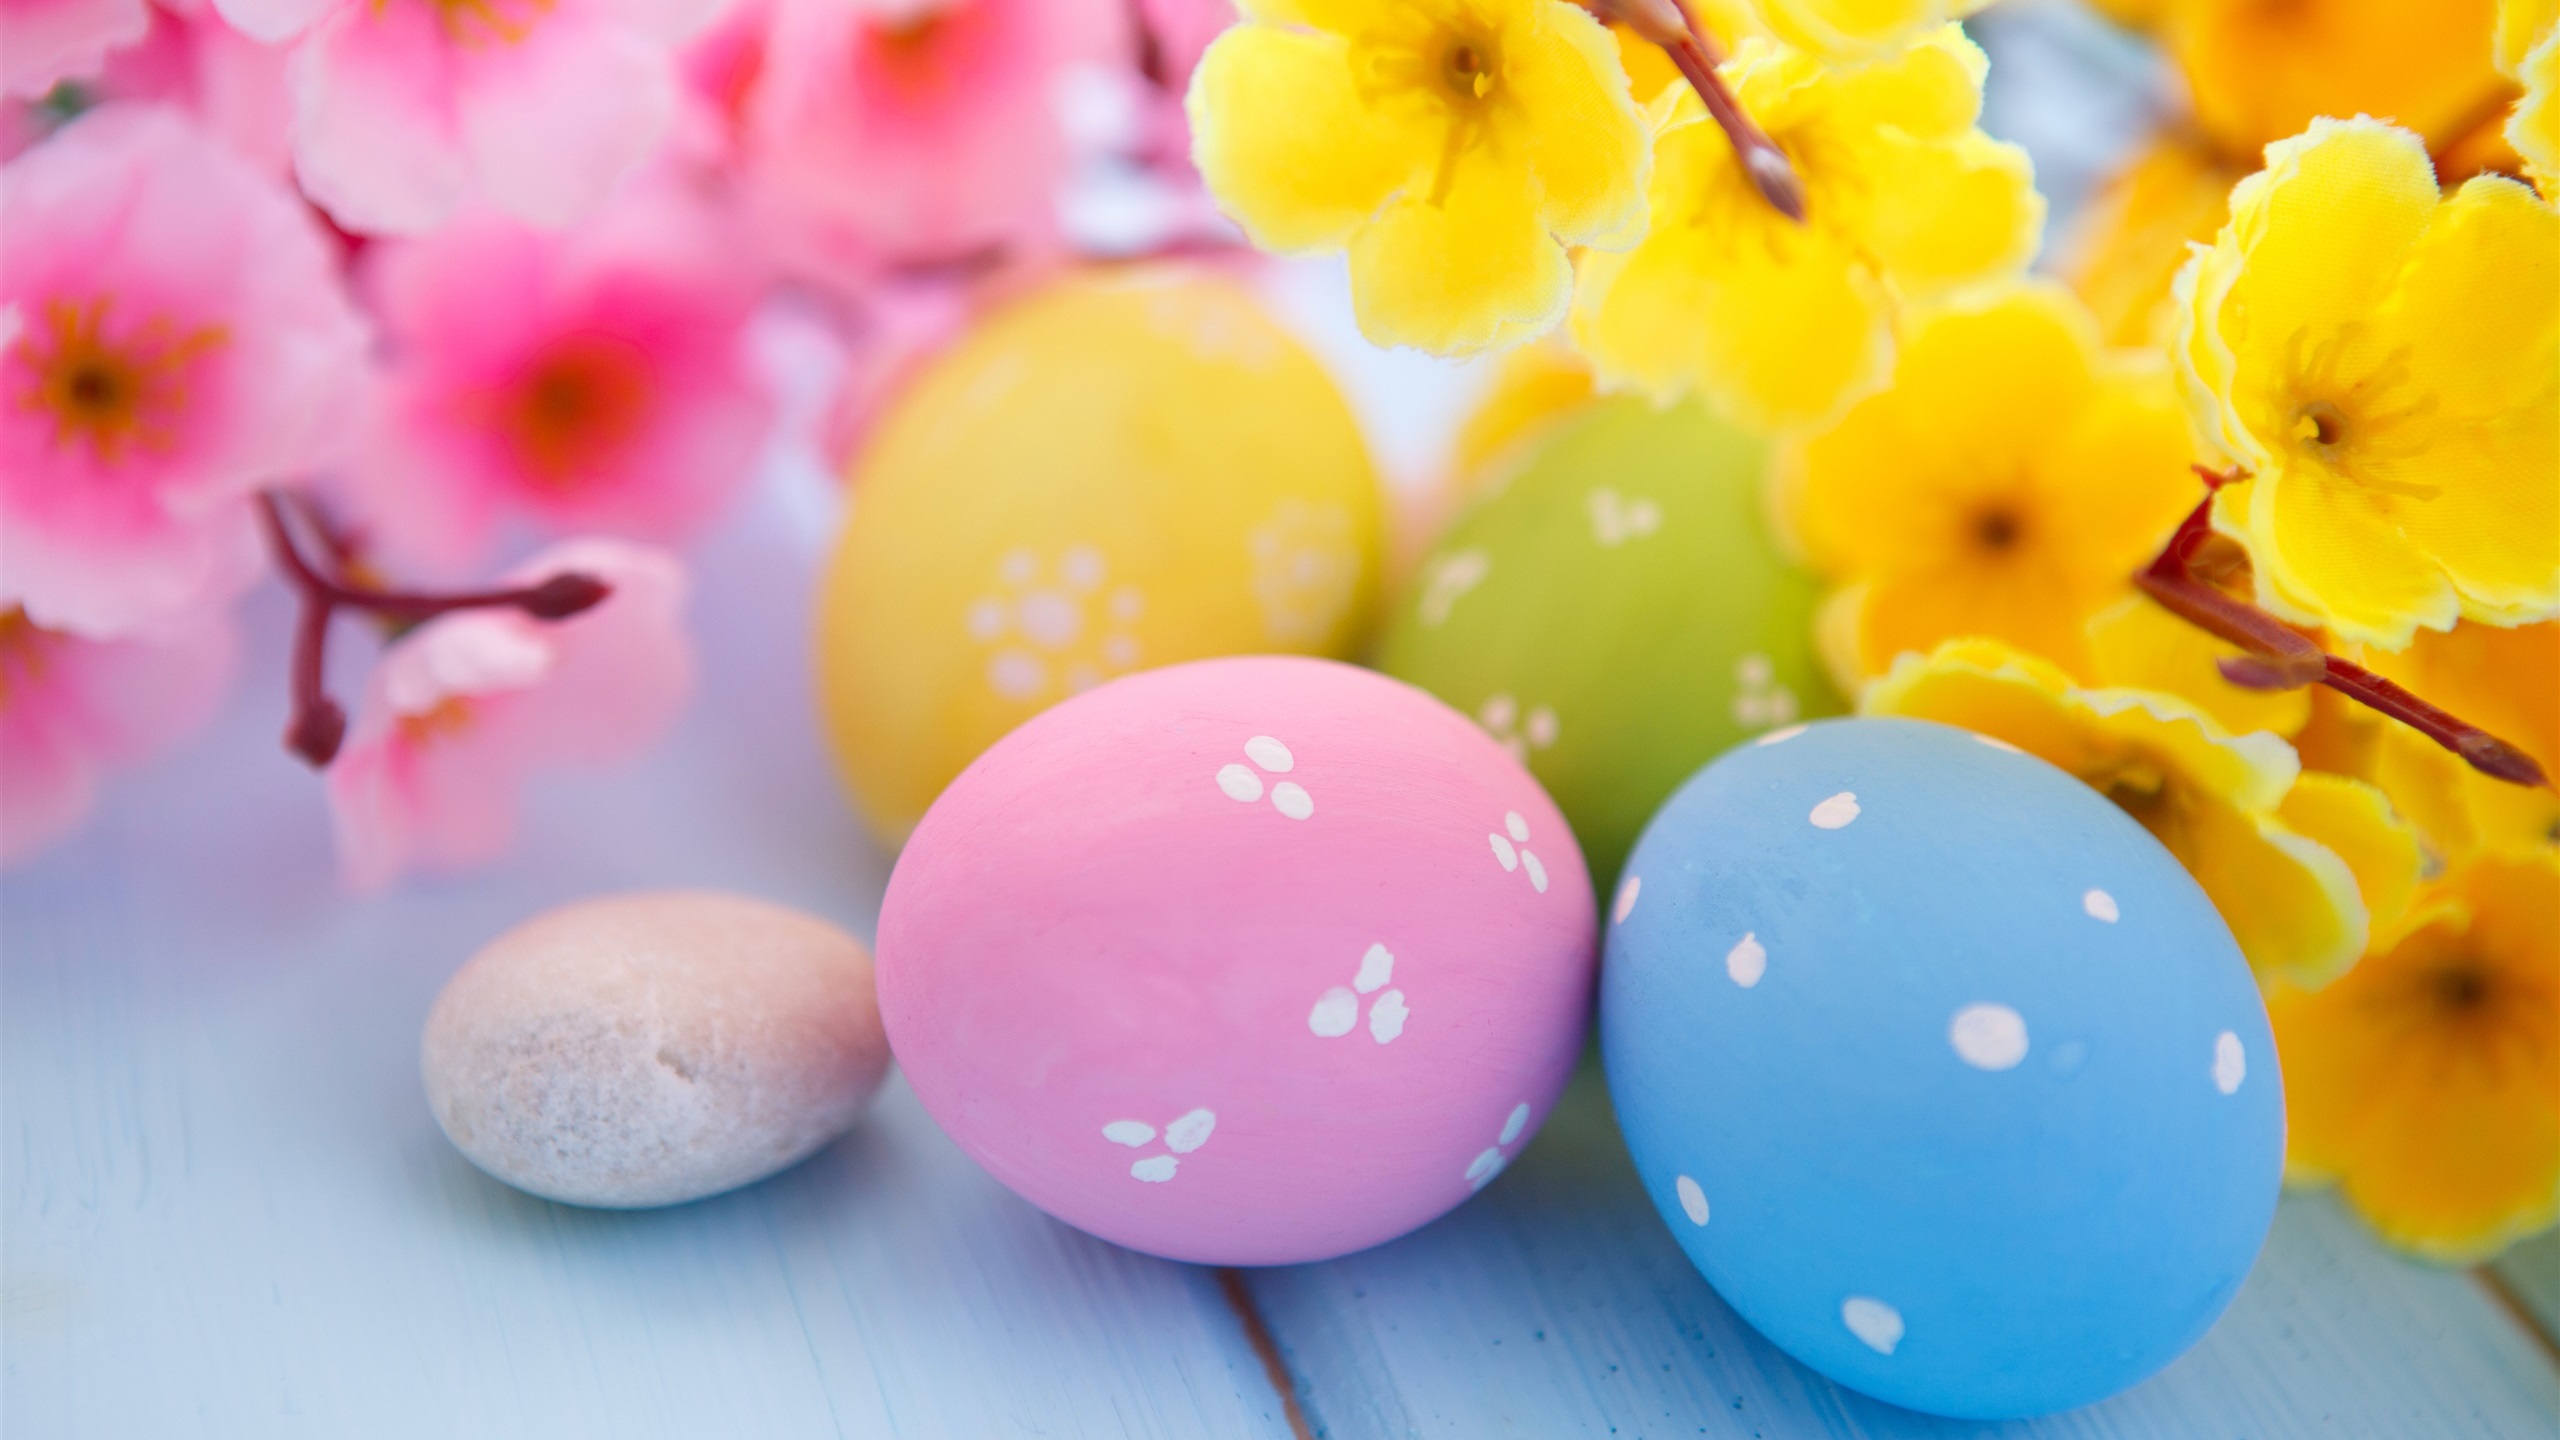 General 2560x1440 easter eggs flowers Easter colorful plants